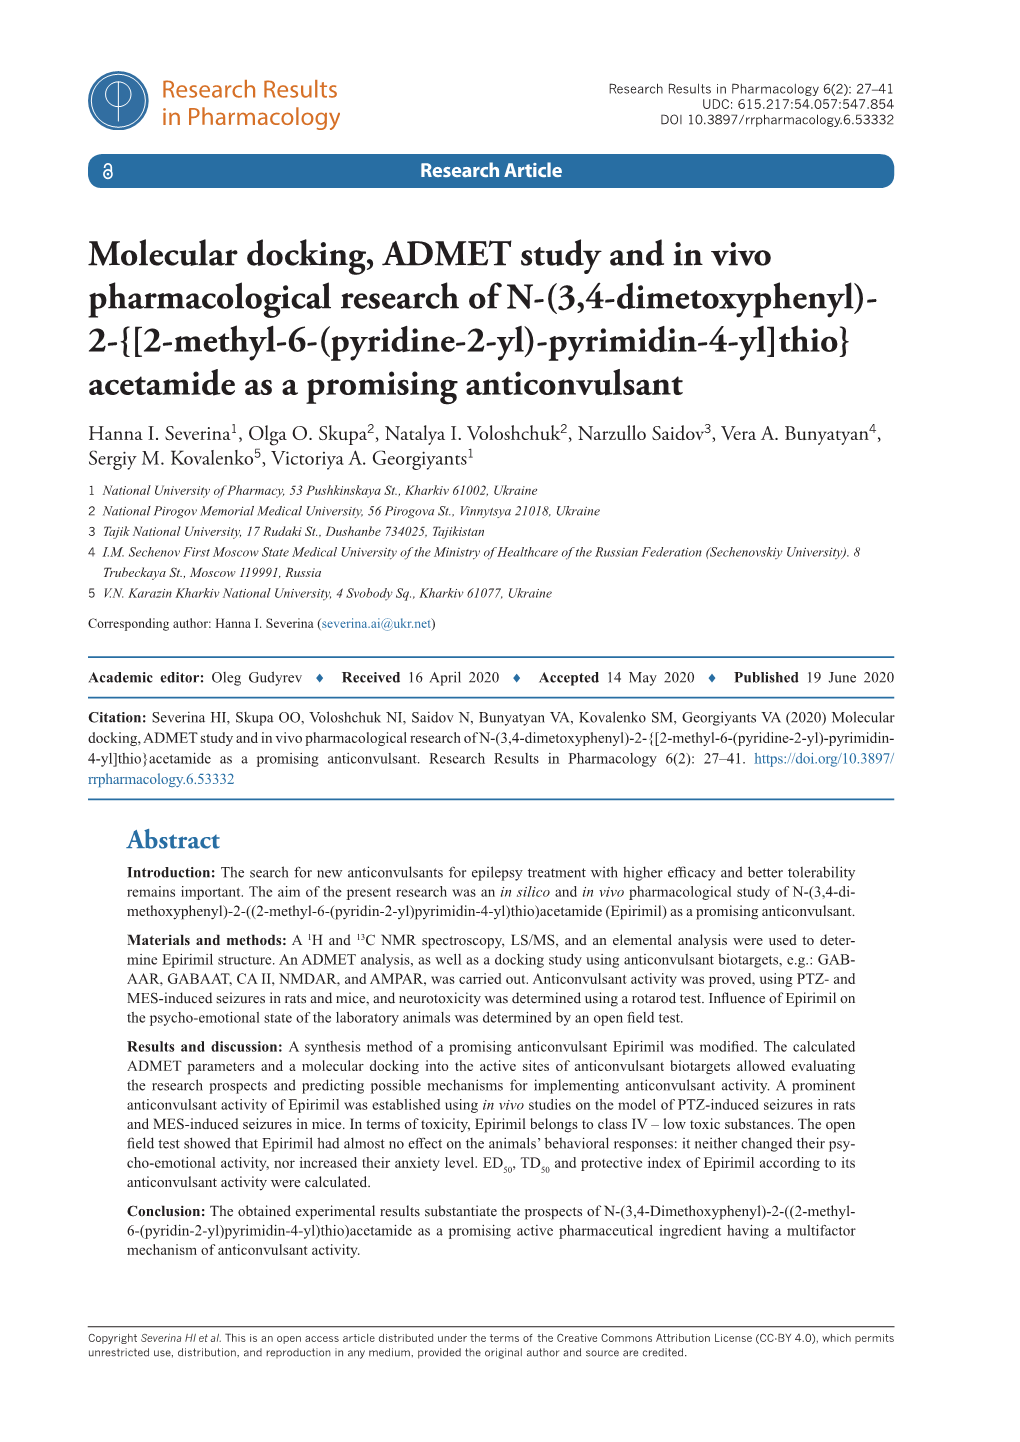 Molecular Docking, ADMET Study and in Vivo Pharmacological Research of N